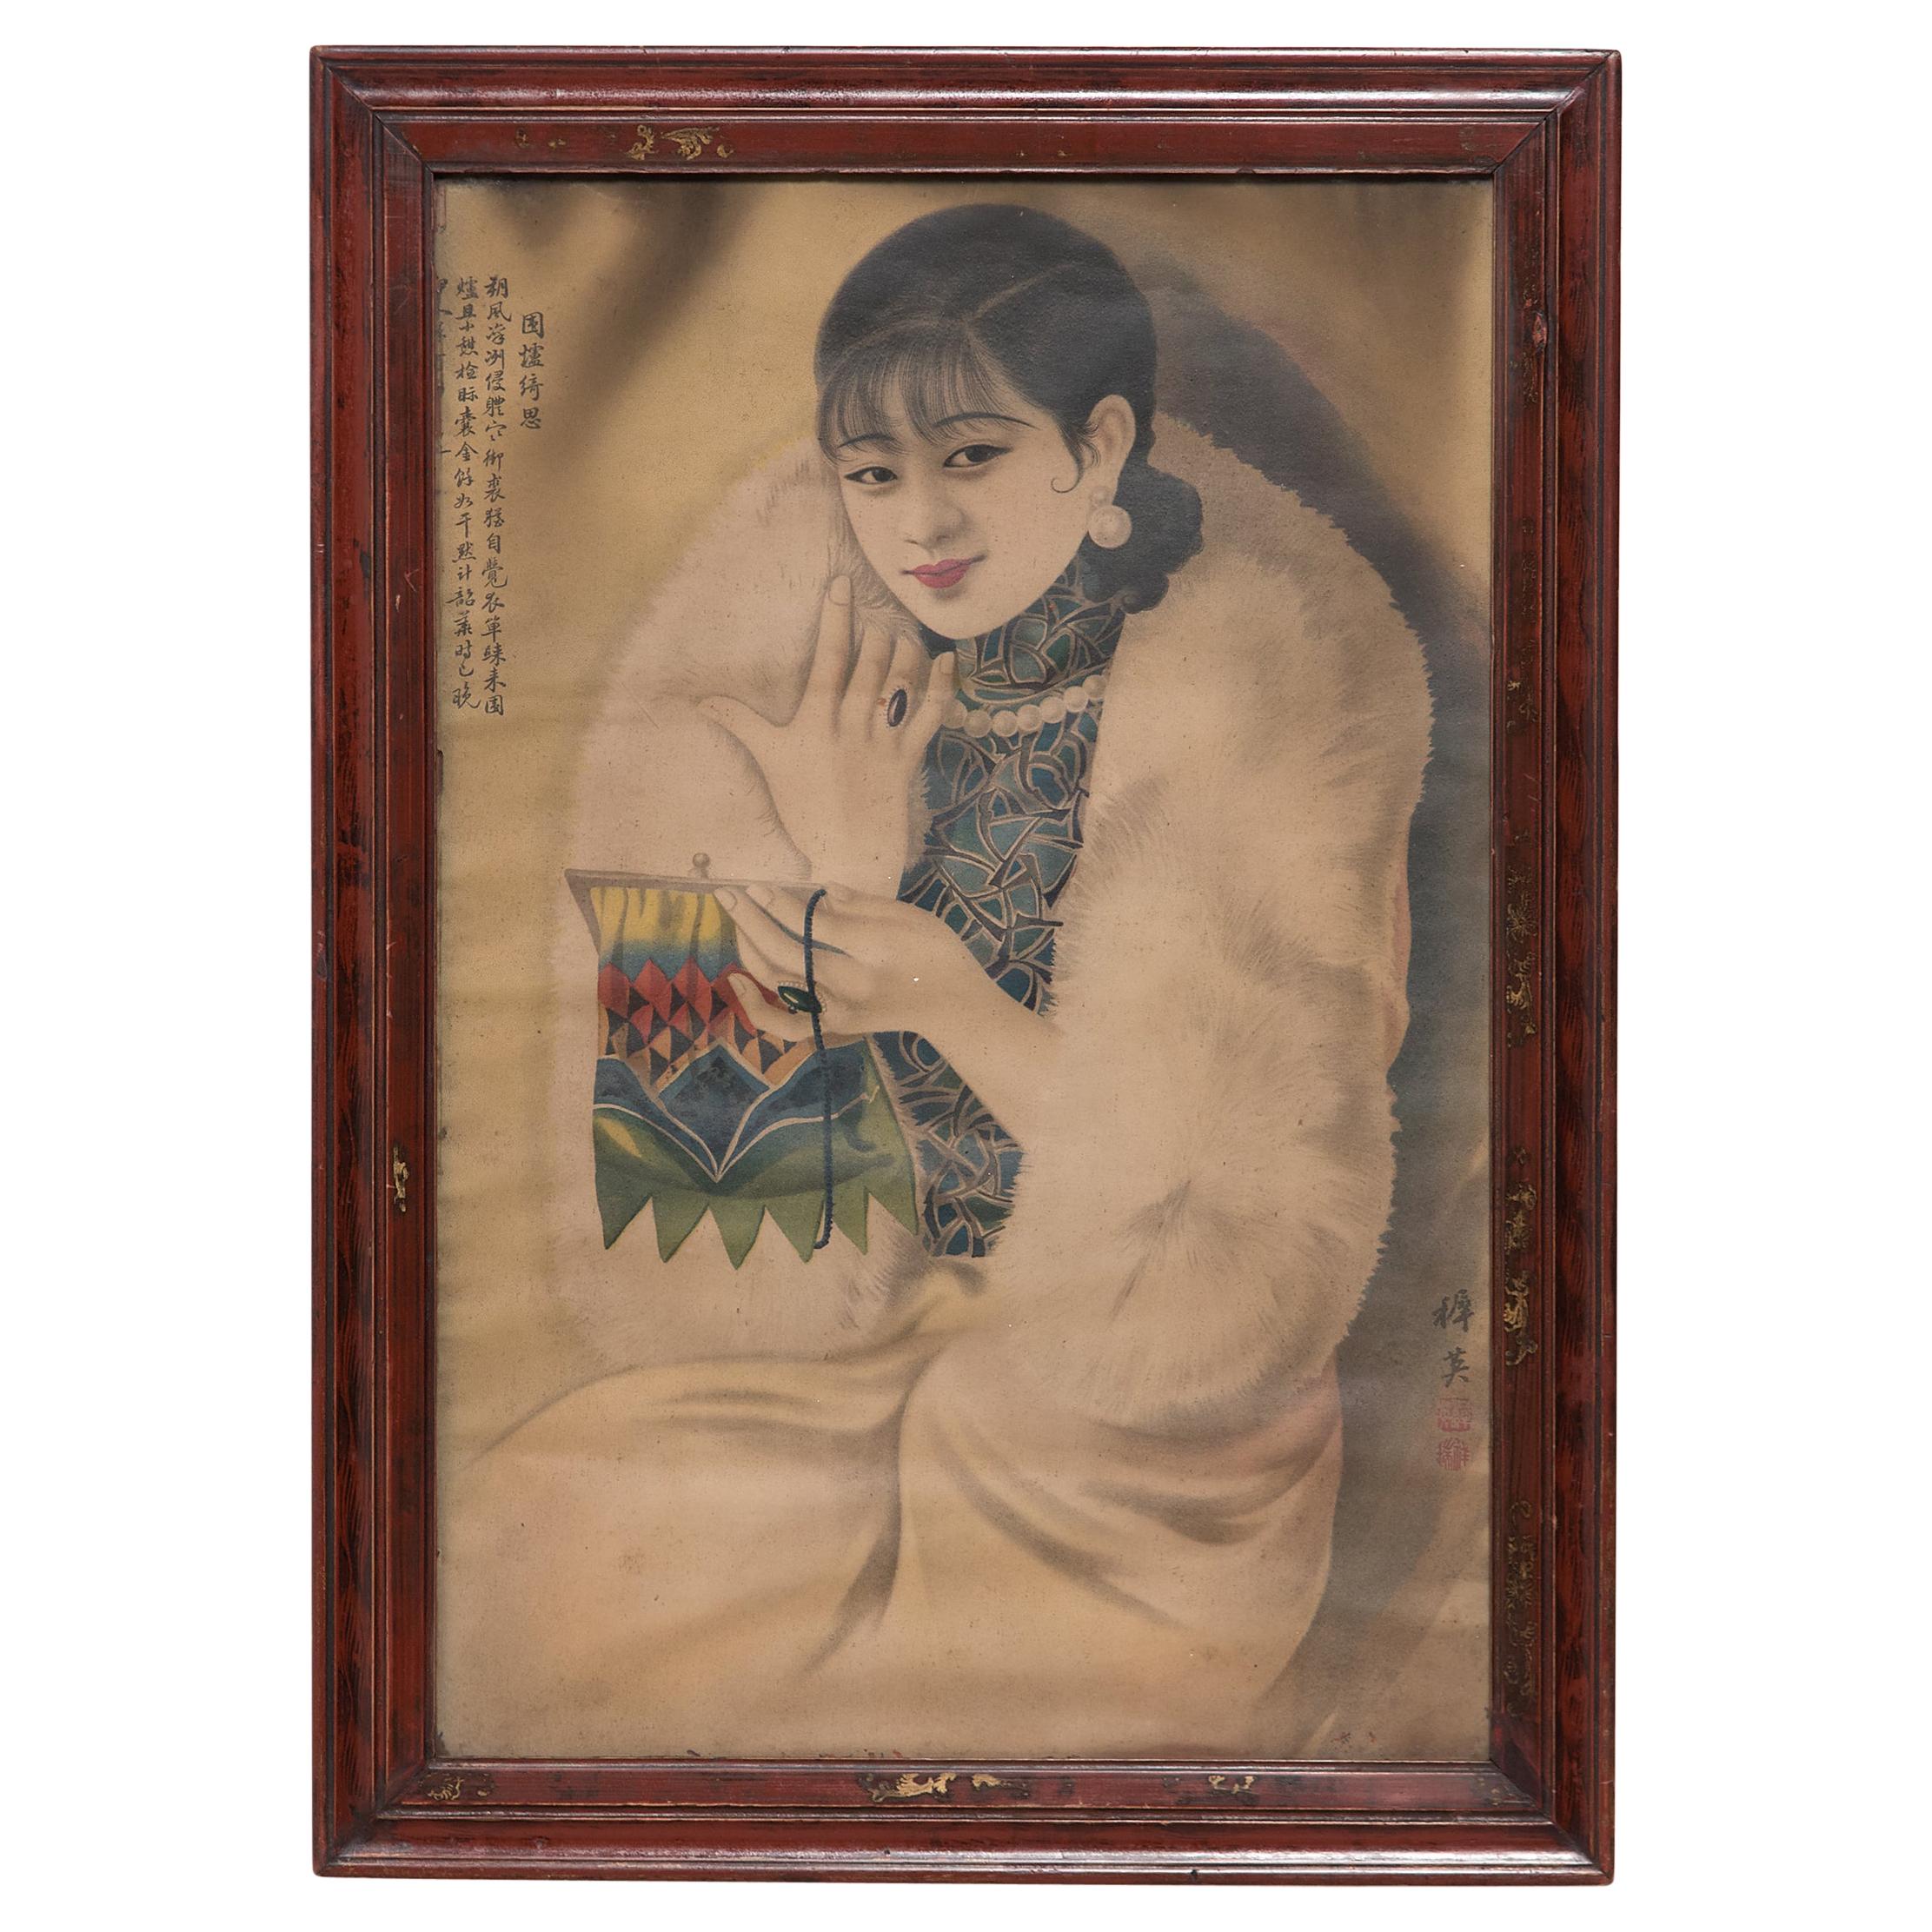 Framed Chinese Deco Advertisement Poster with Mirrored Back, c. 1930s